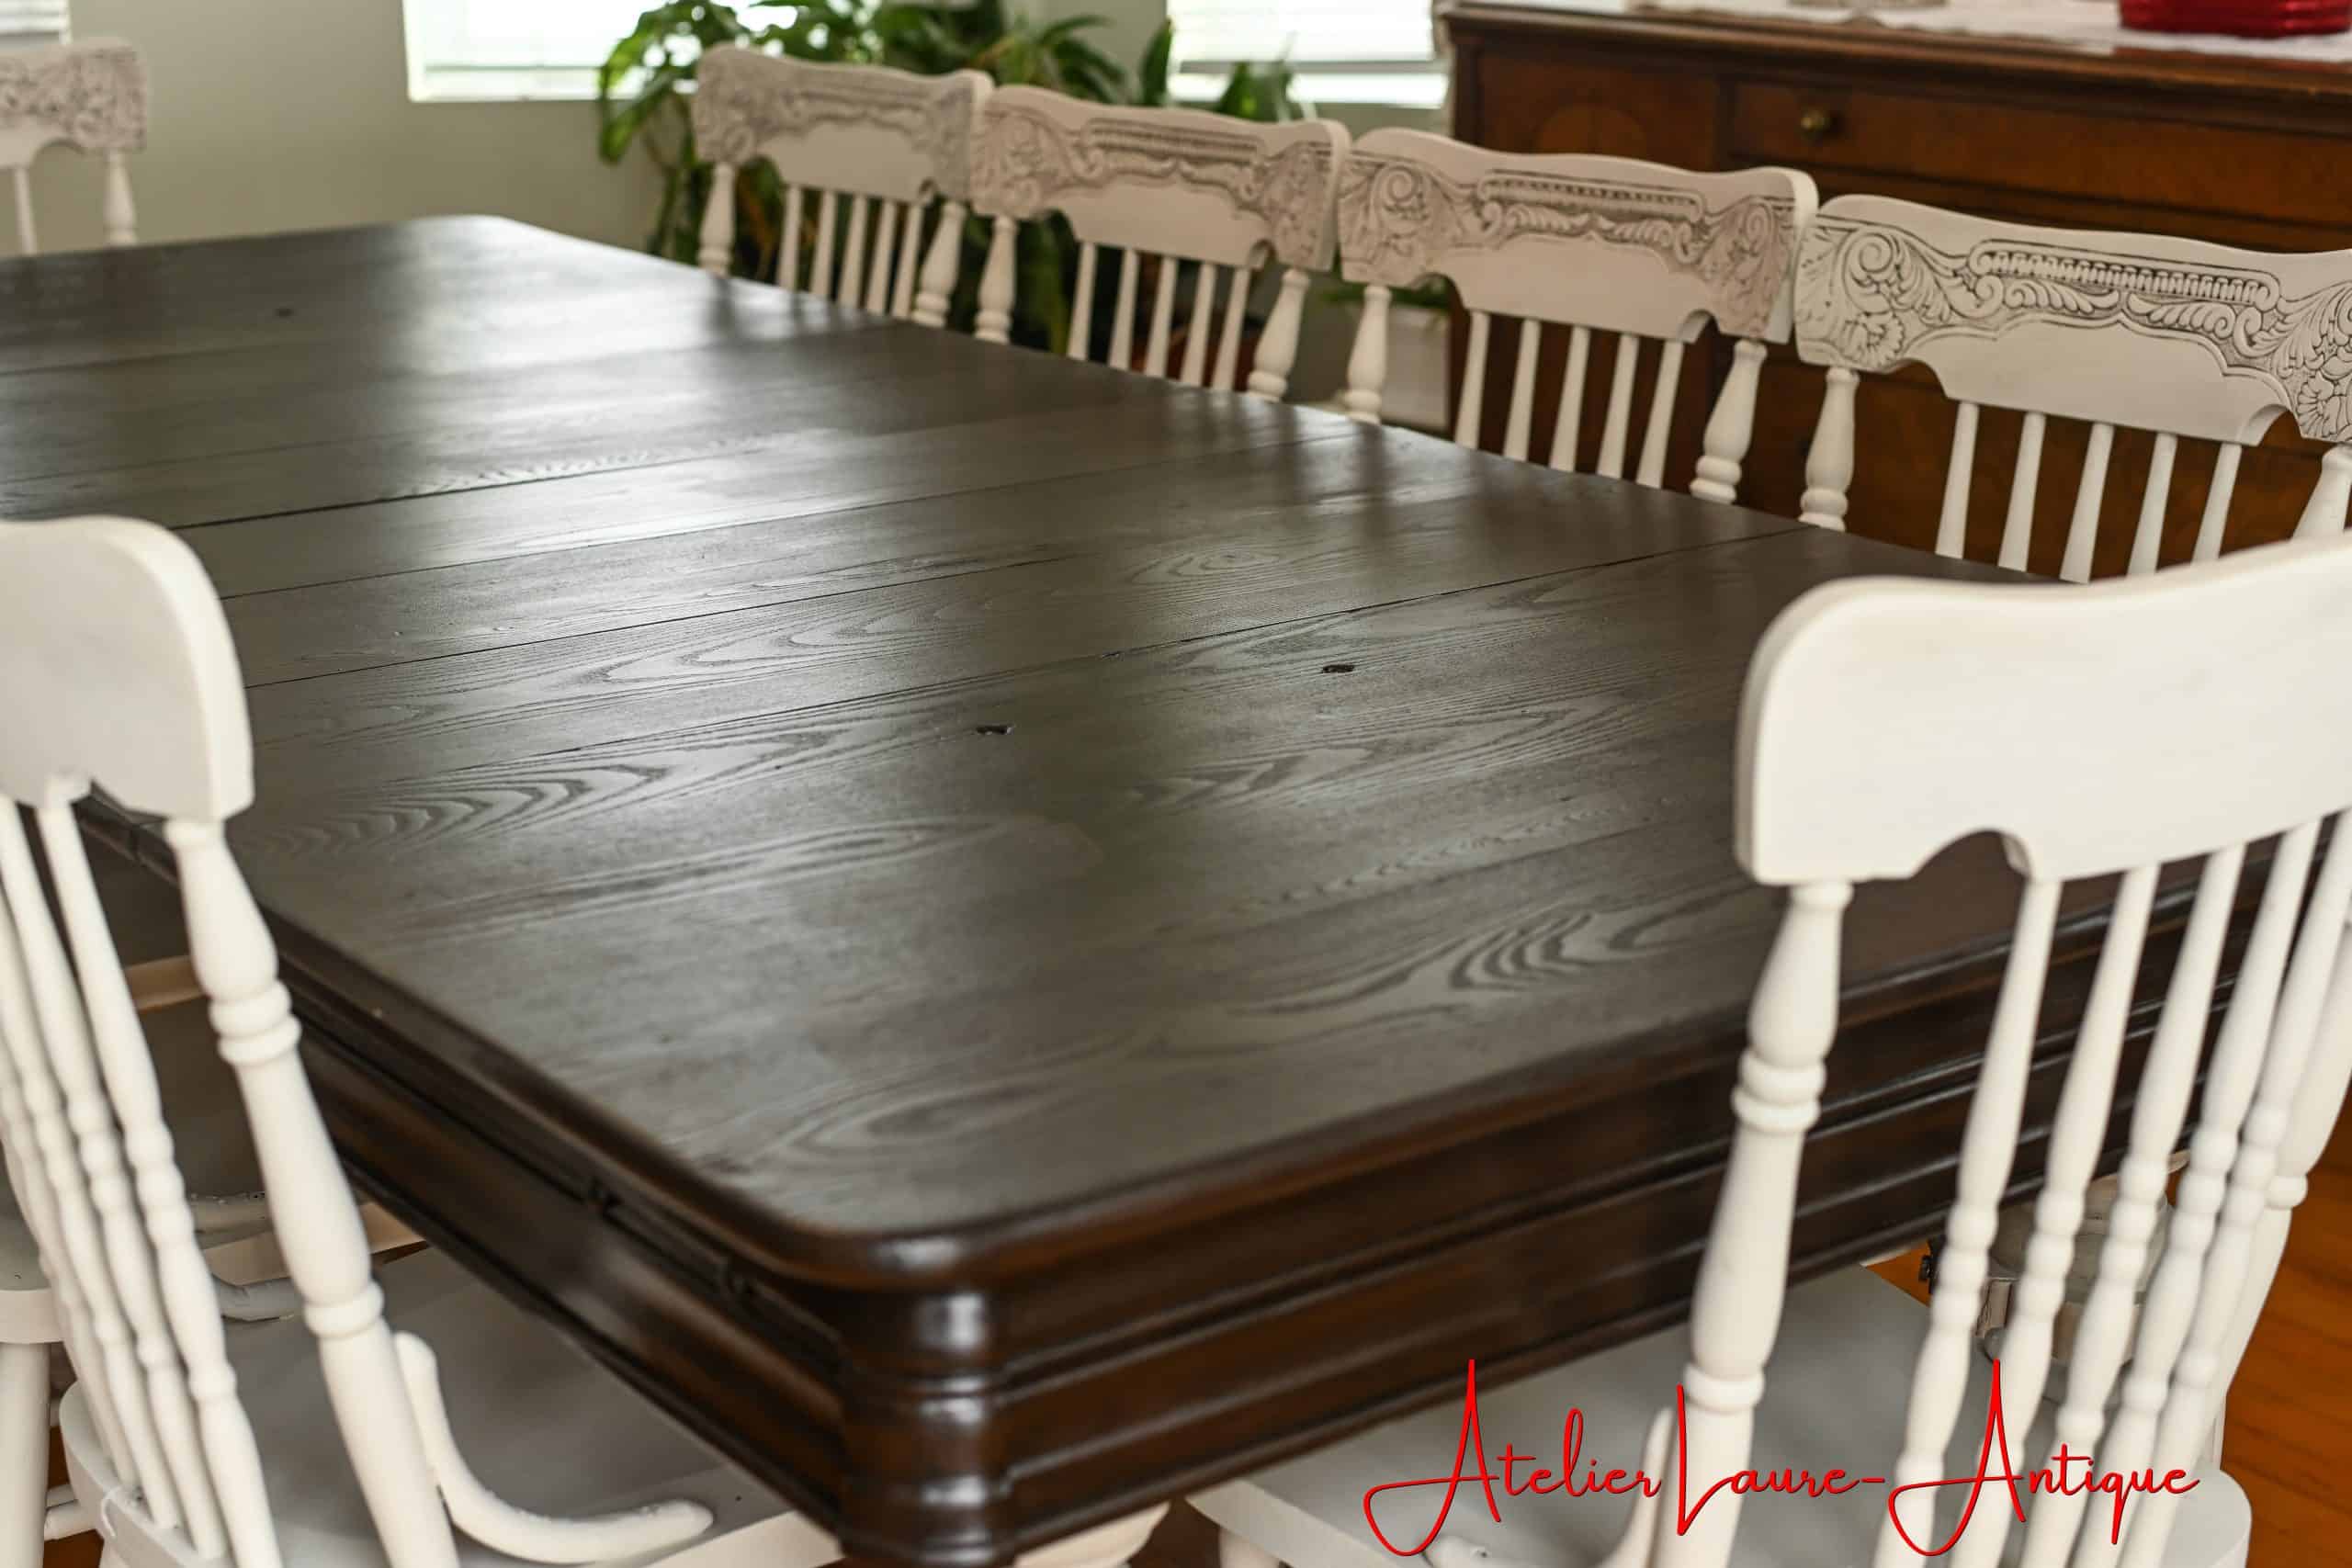 Restoring and Decorating a Century-old Table